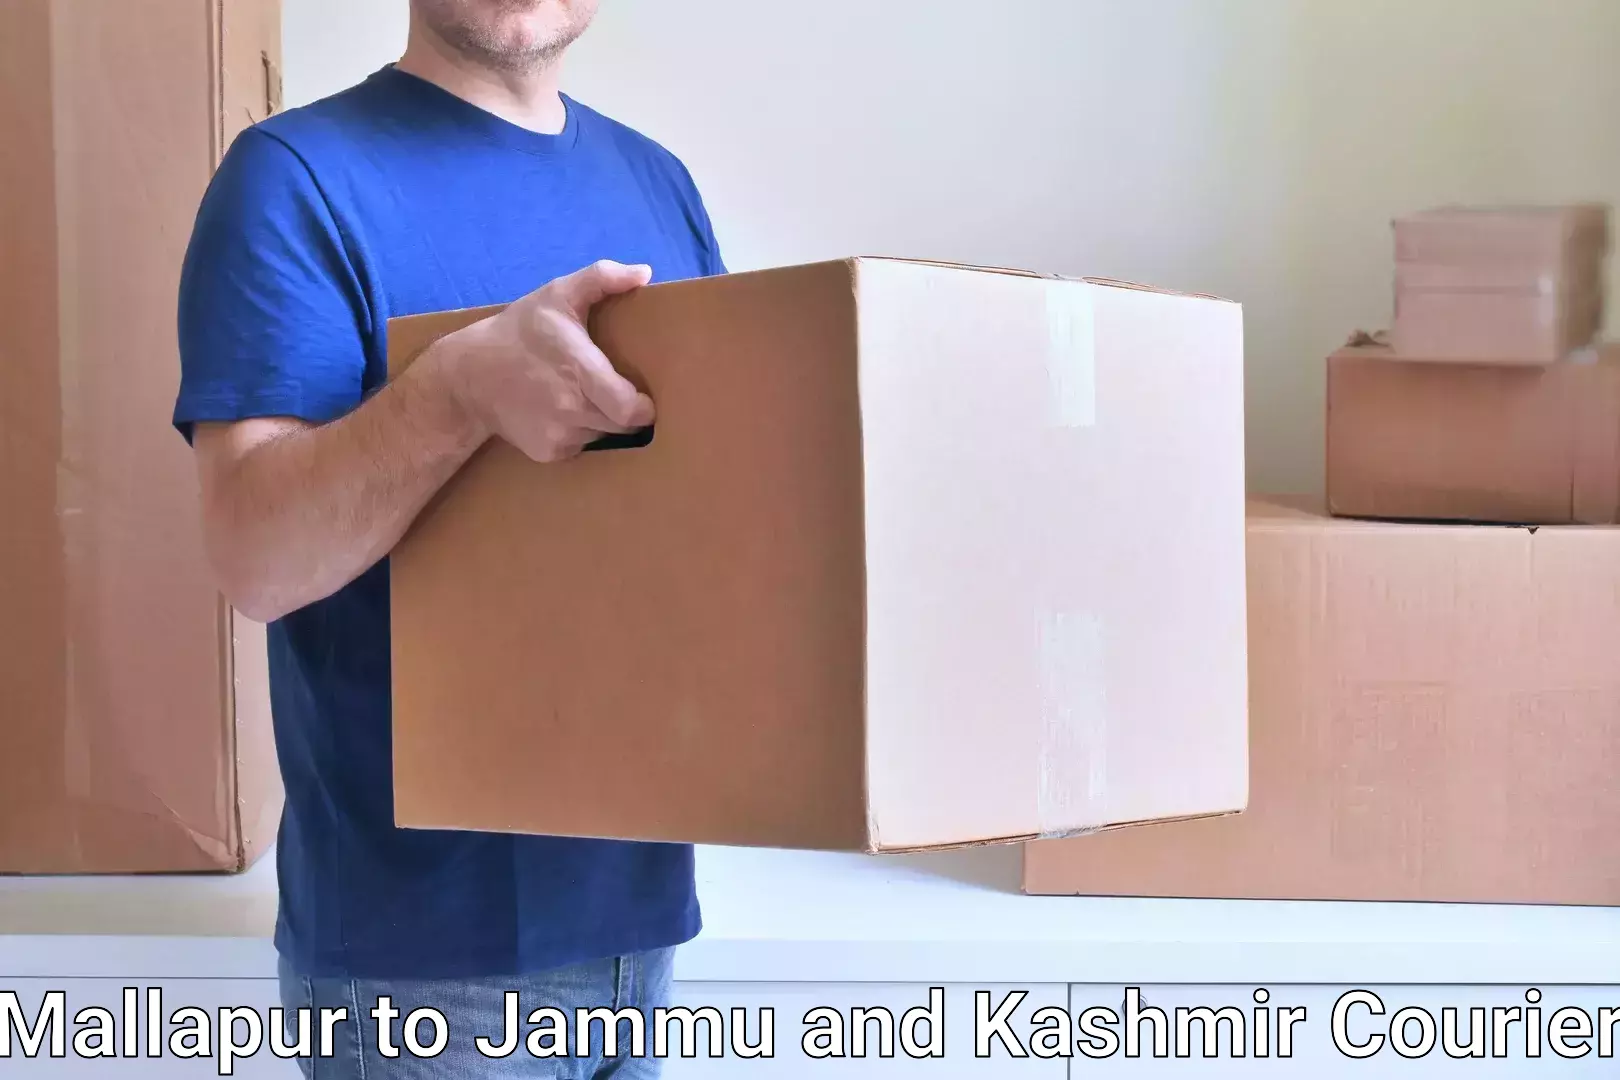 Large package courier Mallapur to Kargil